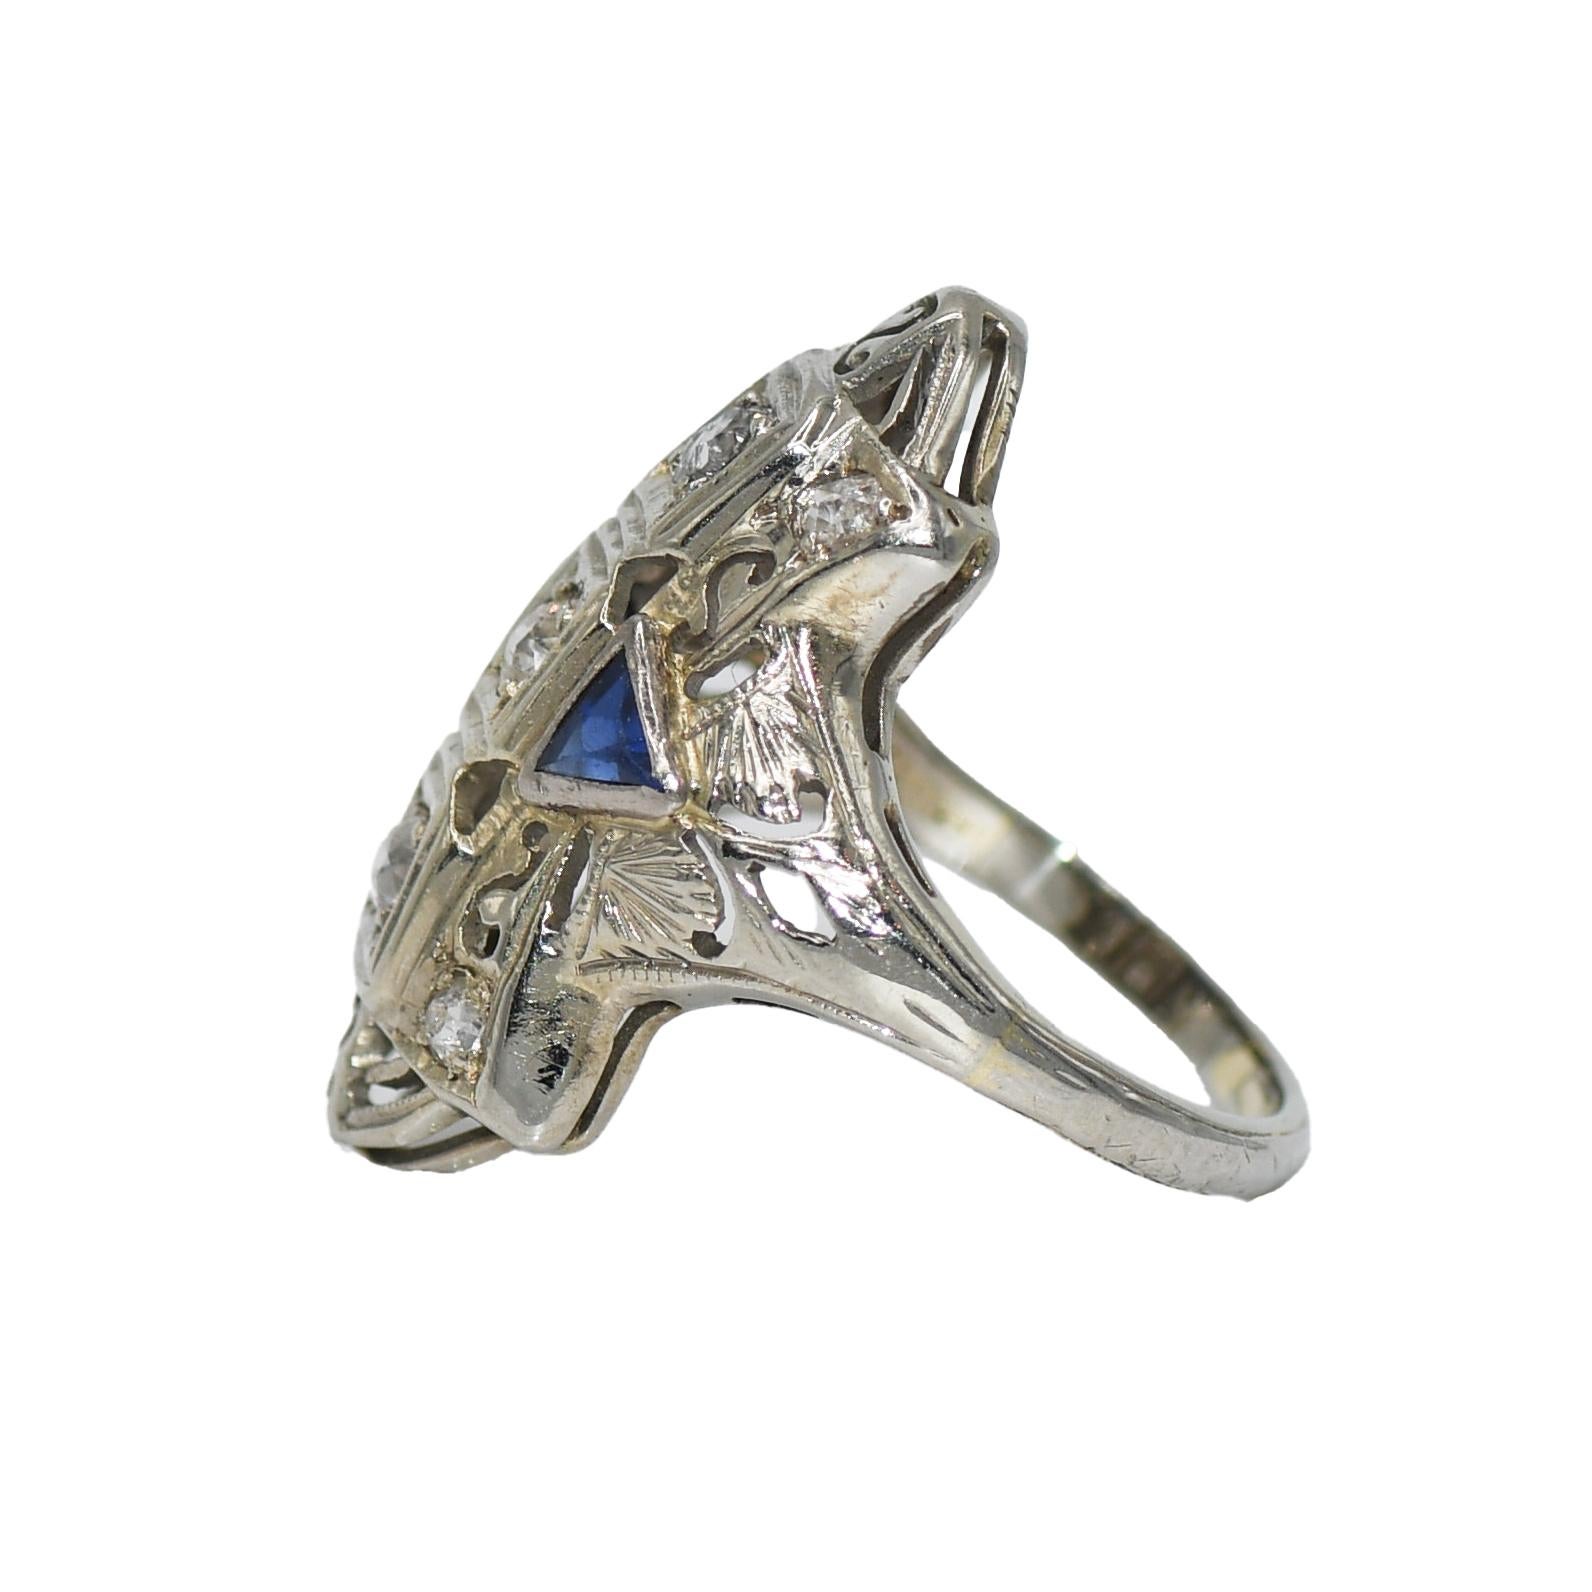 18K White Gold Diamond & Blue Spinel Art Deco Ring 3.4g In Excellent Condition For Sale In Laguna Beach, CA